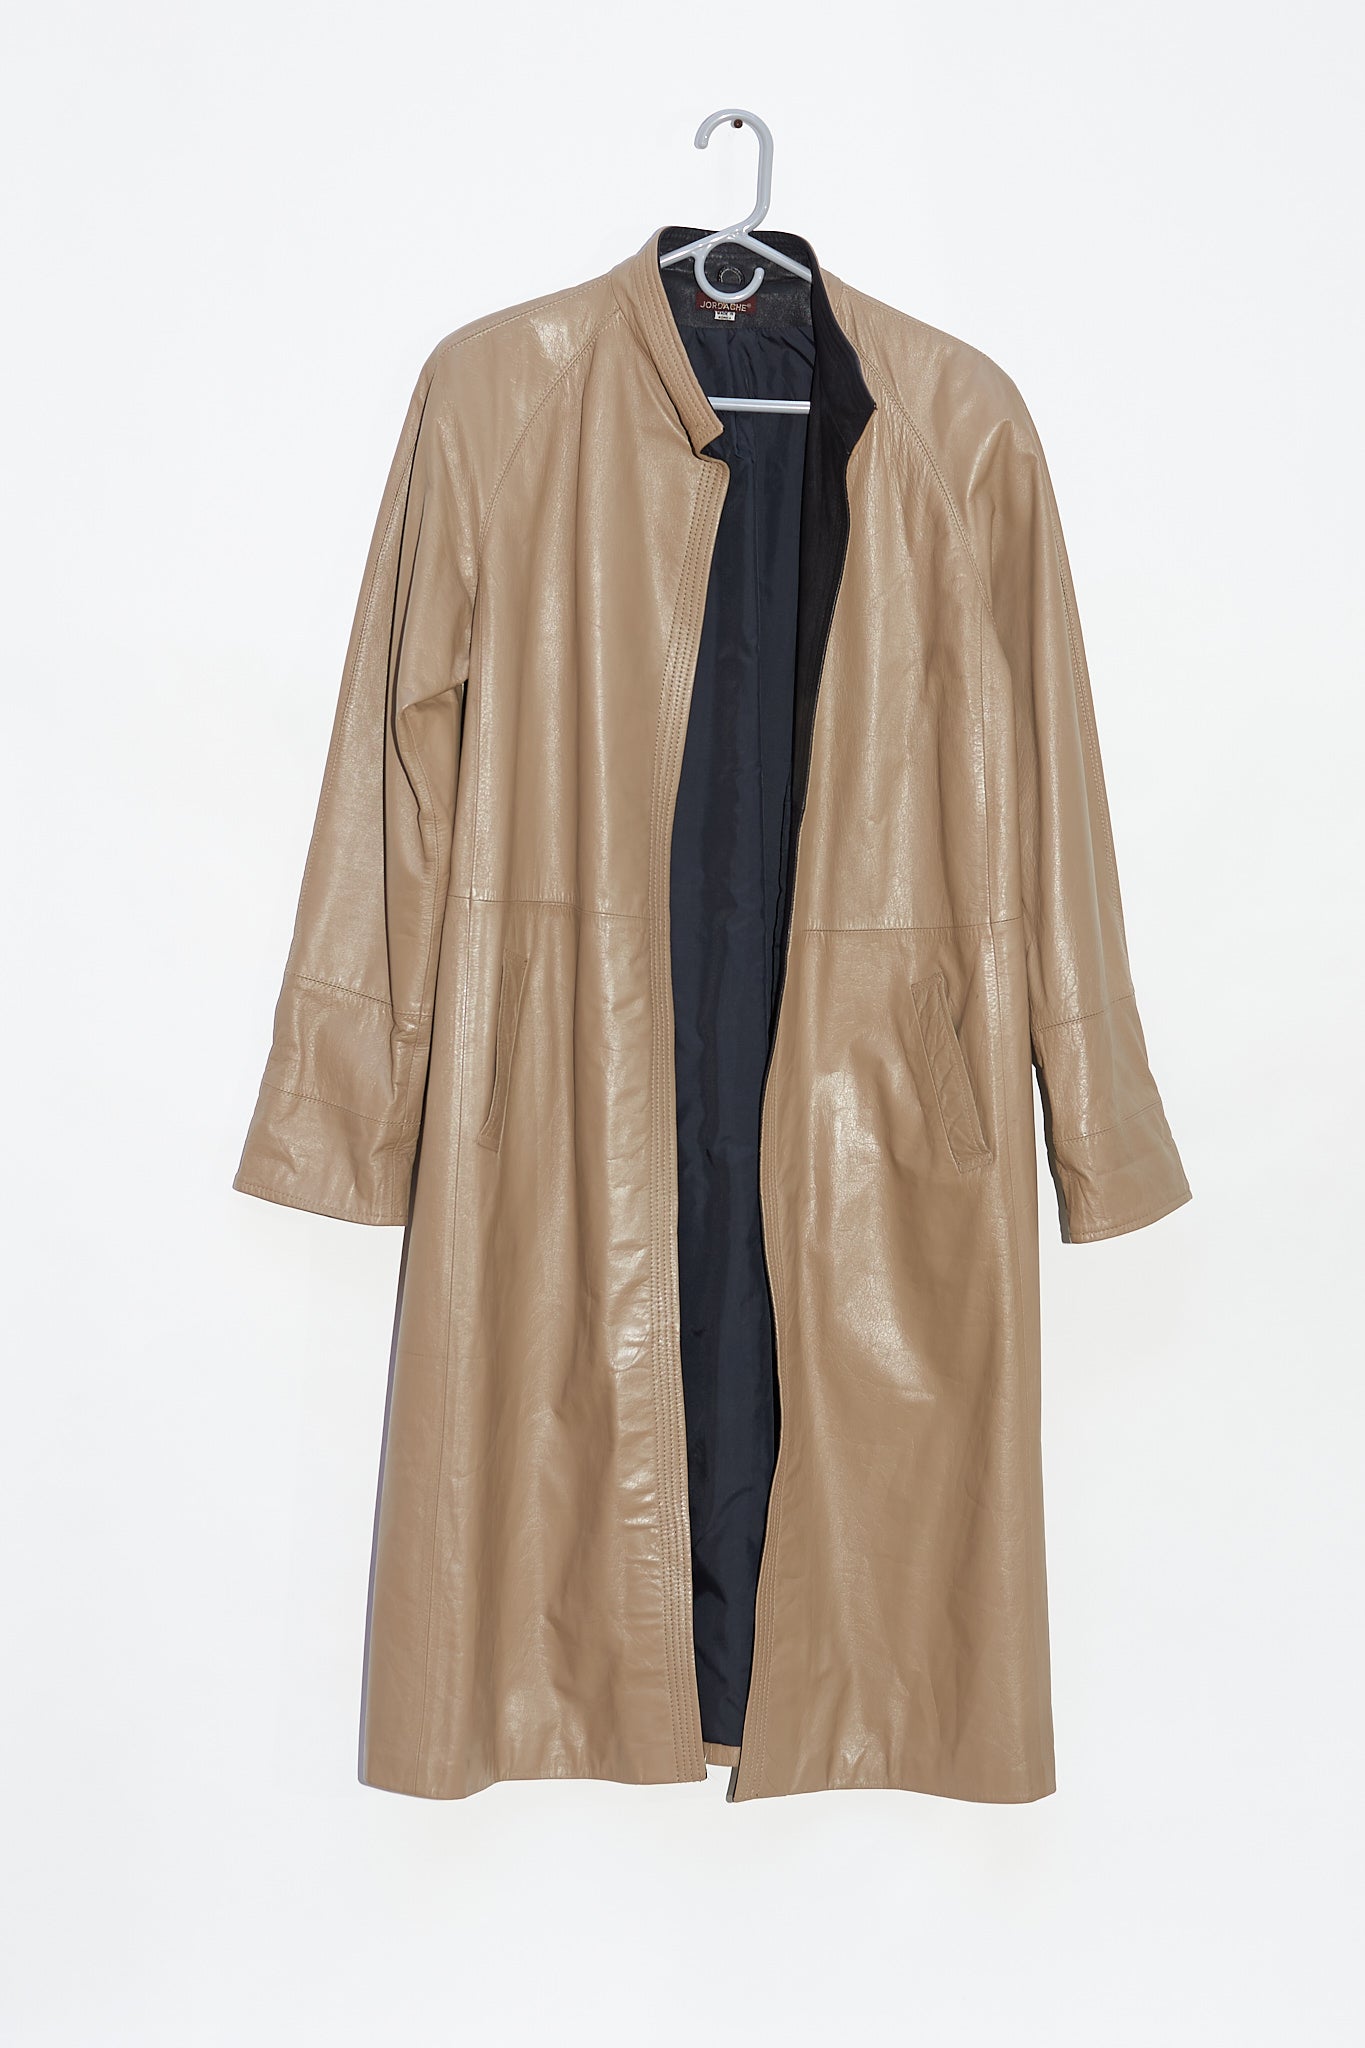 Jordache Tan Leather Trench Coat